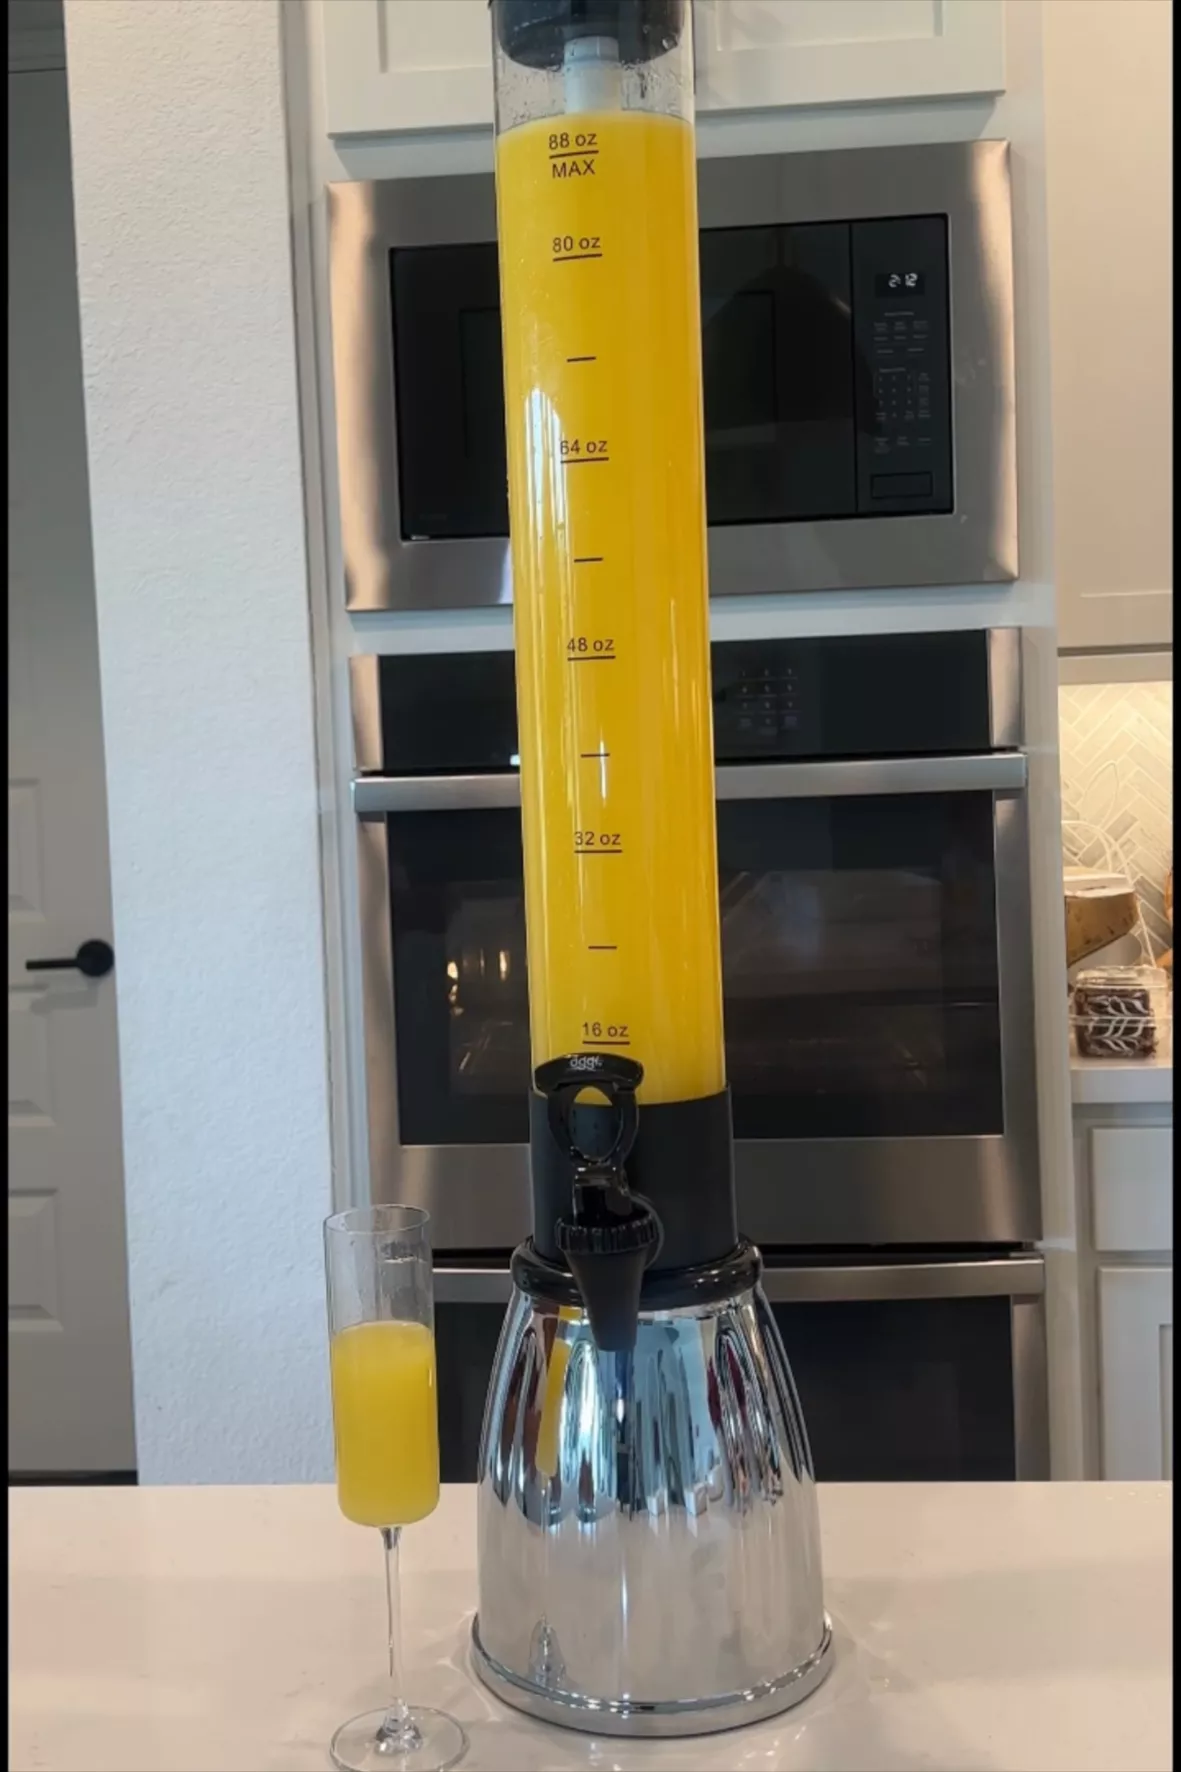 OGGI Beer Tower 3L/100oz - Beverage Dispenser with Spigot & Ice Tube,  Margarita Tower, Mimosa Tower, Perfect Drink Dispensers for Parties, Drink